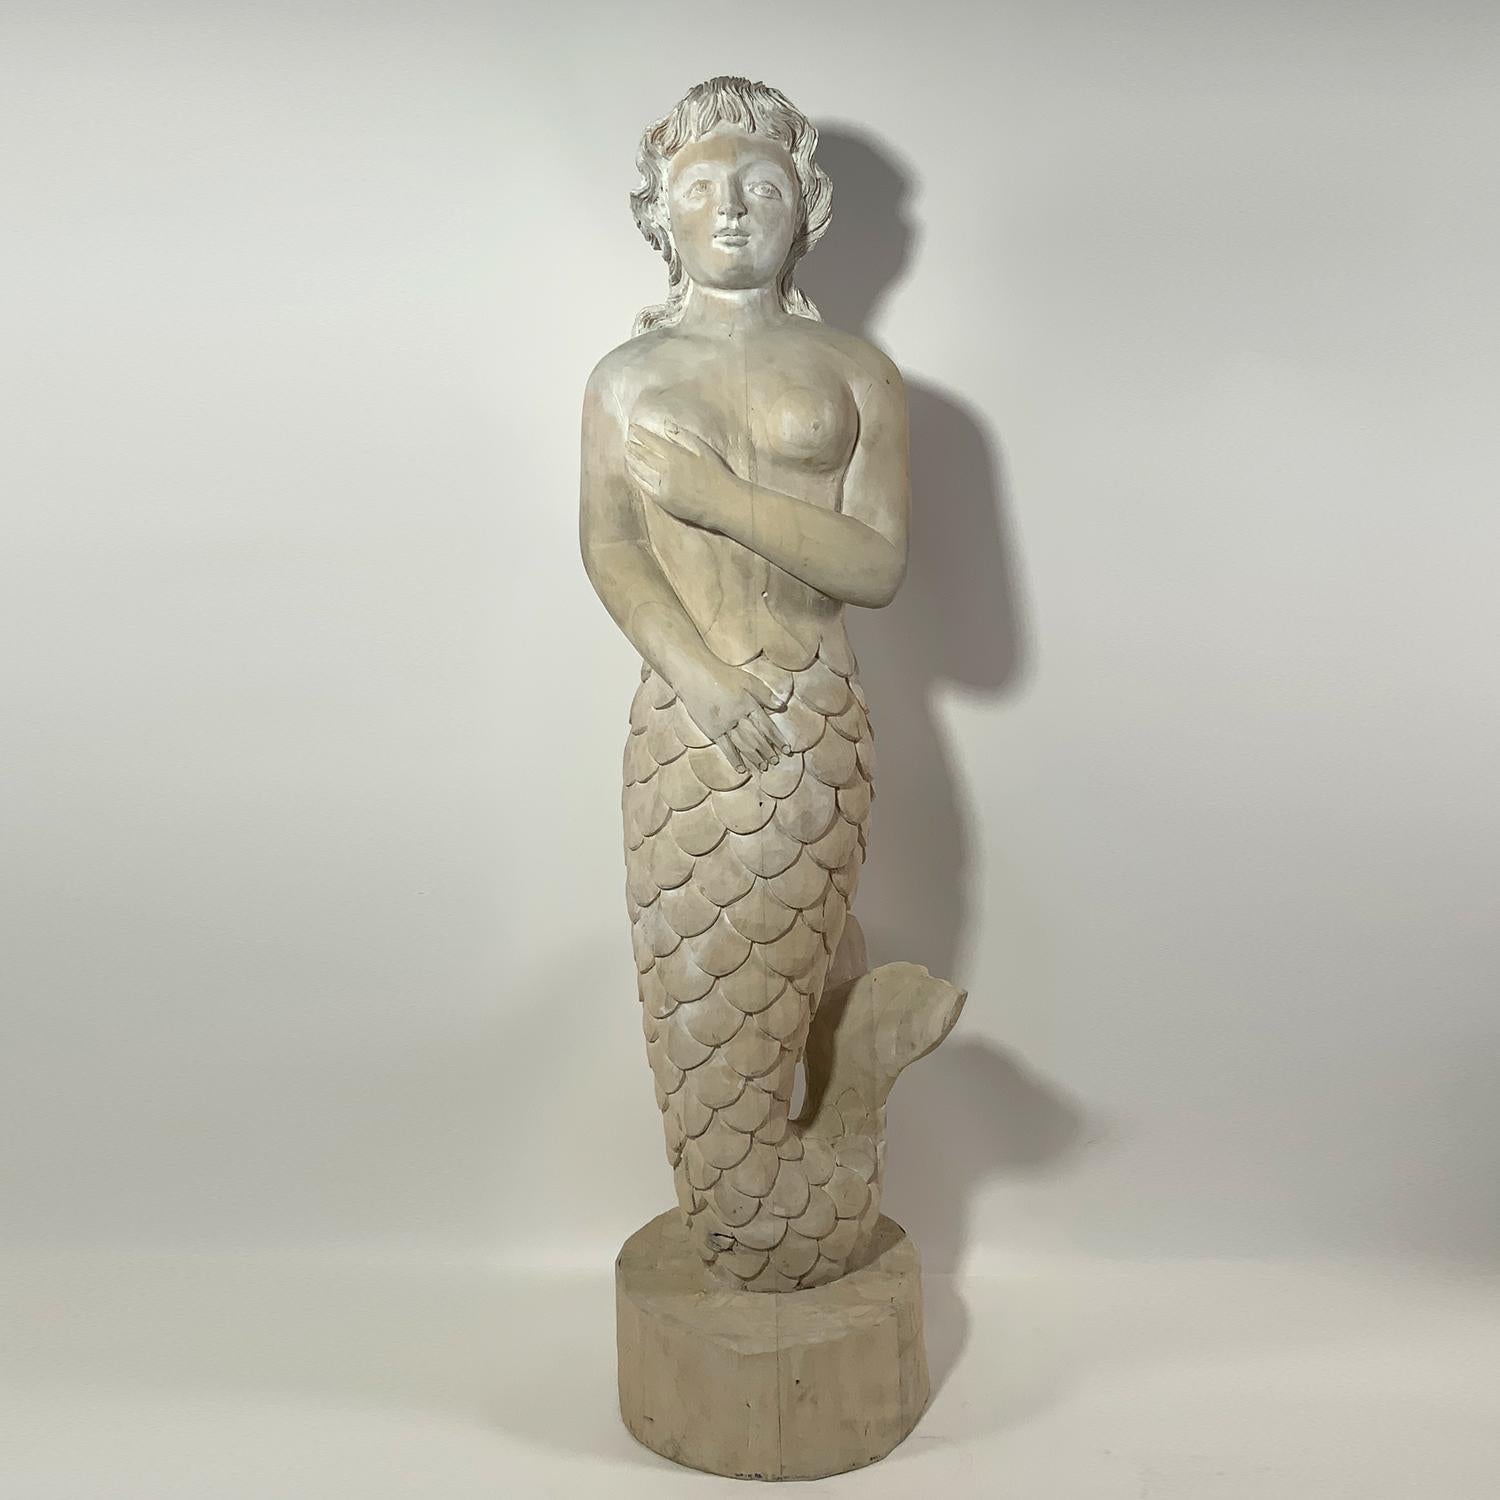 Well carved mermaid with upswept tail. Pretty face. Pickled white finish. Quality carving from a Nantucket Estate. Circa 1980.